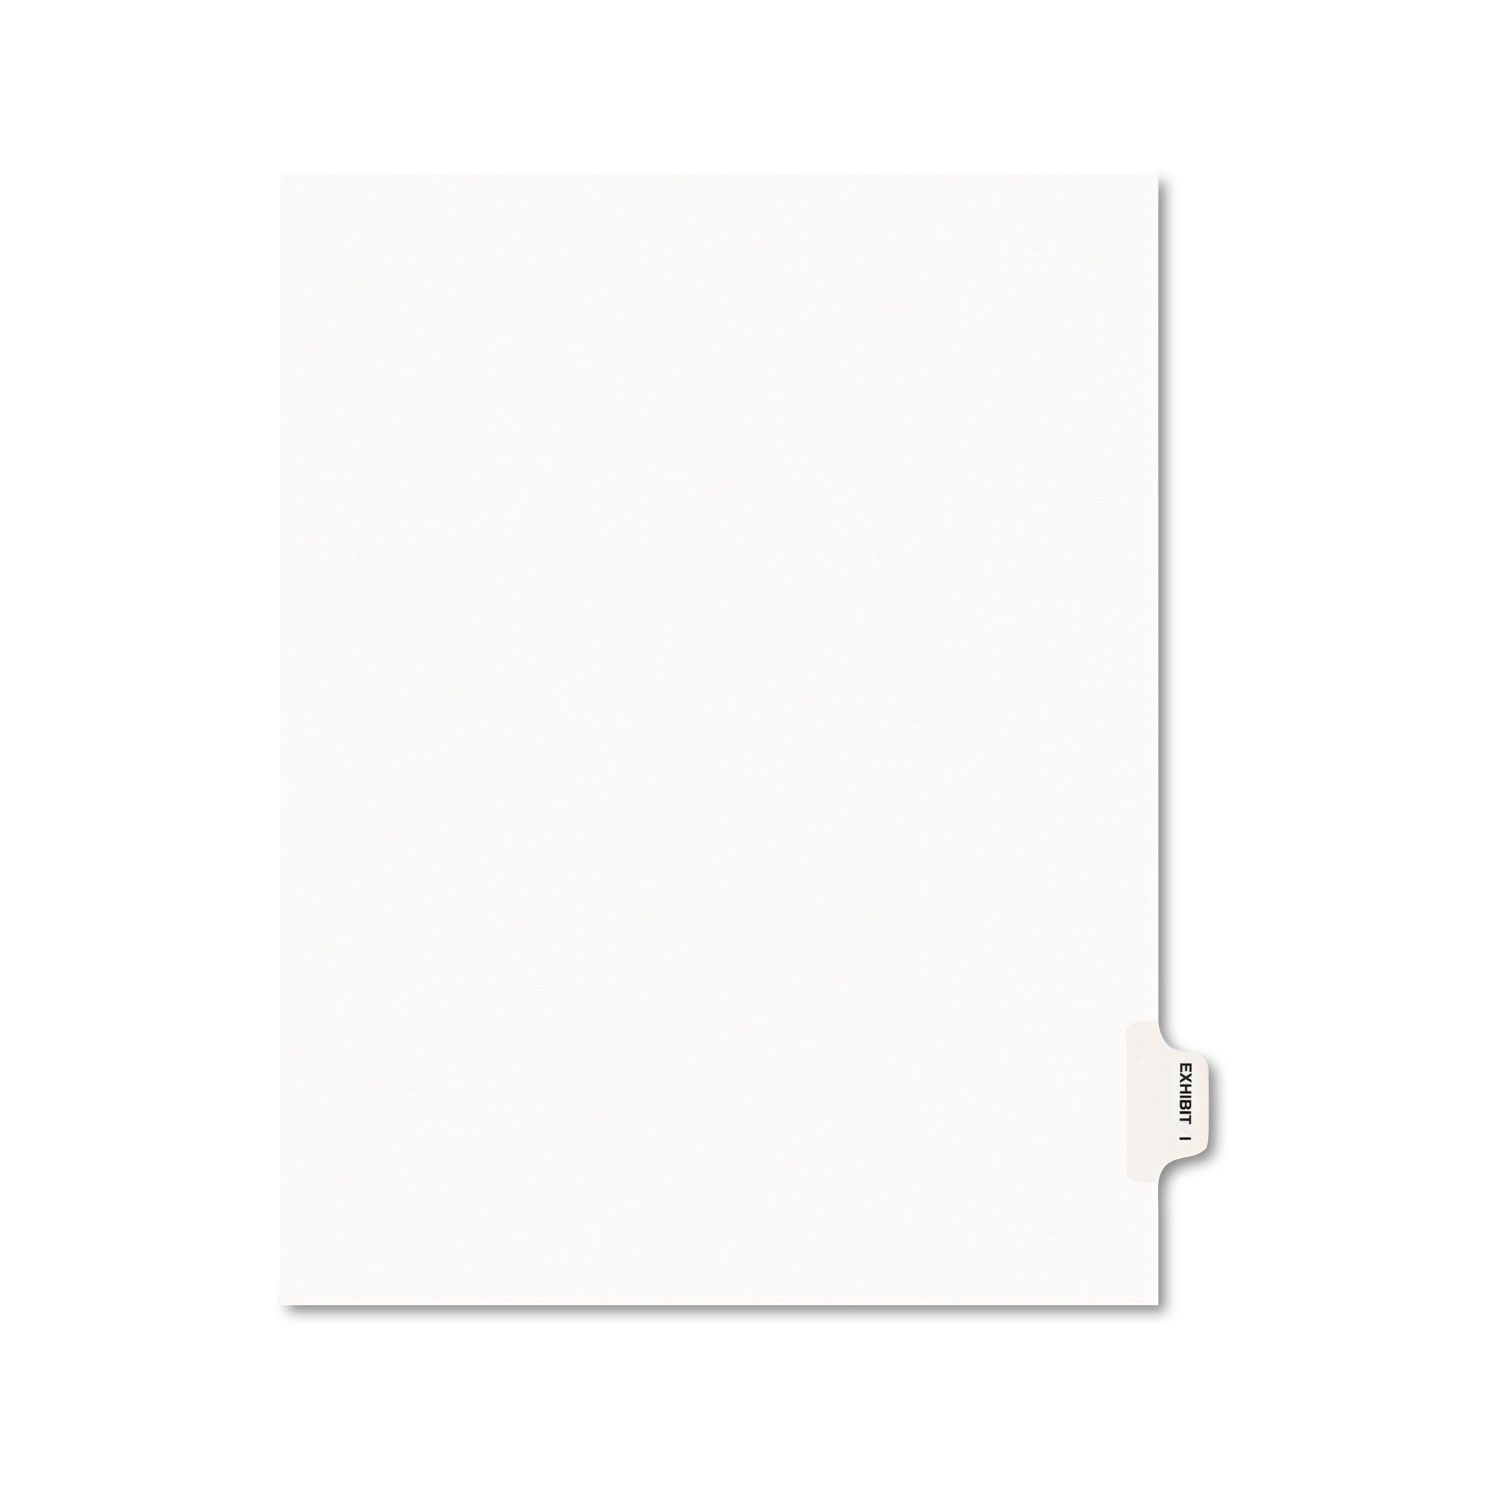  Avery 01379 Avery-Style Preprinted Legal Side Tab Divider, Exhibit I, Letter, White, 25/Pack (AVE01379) 